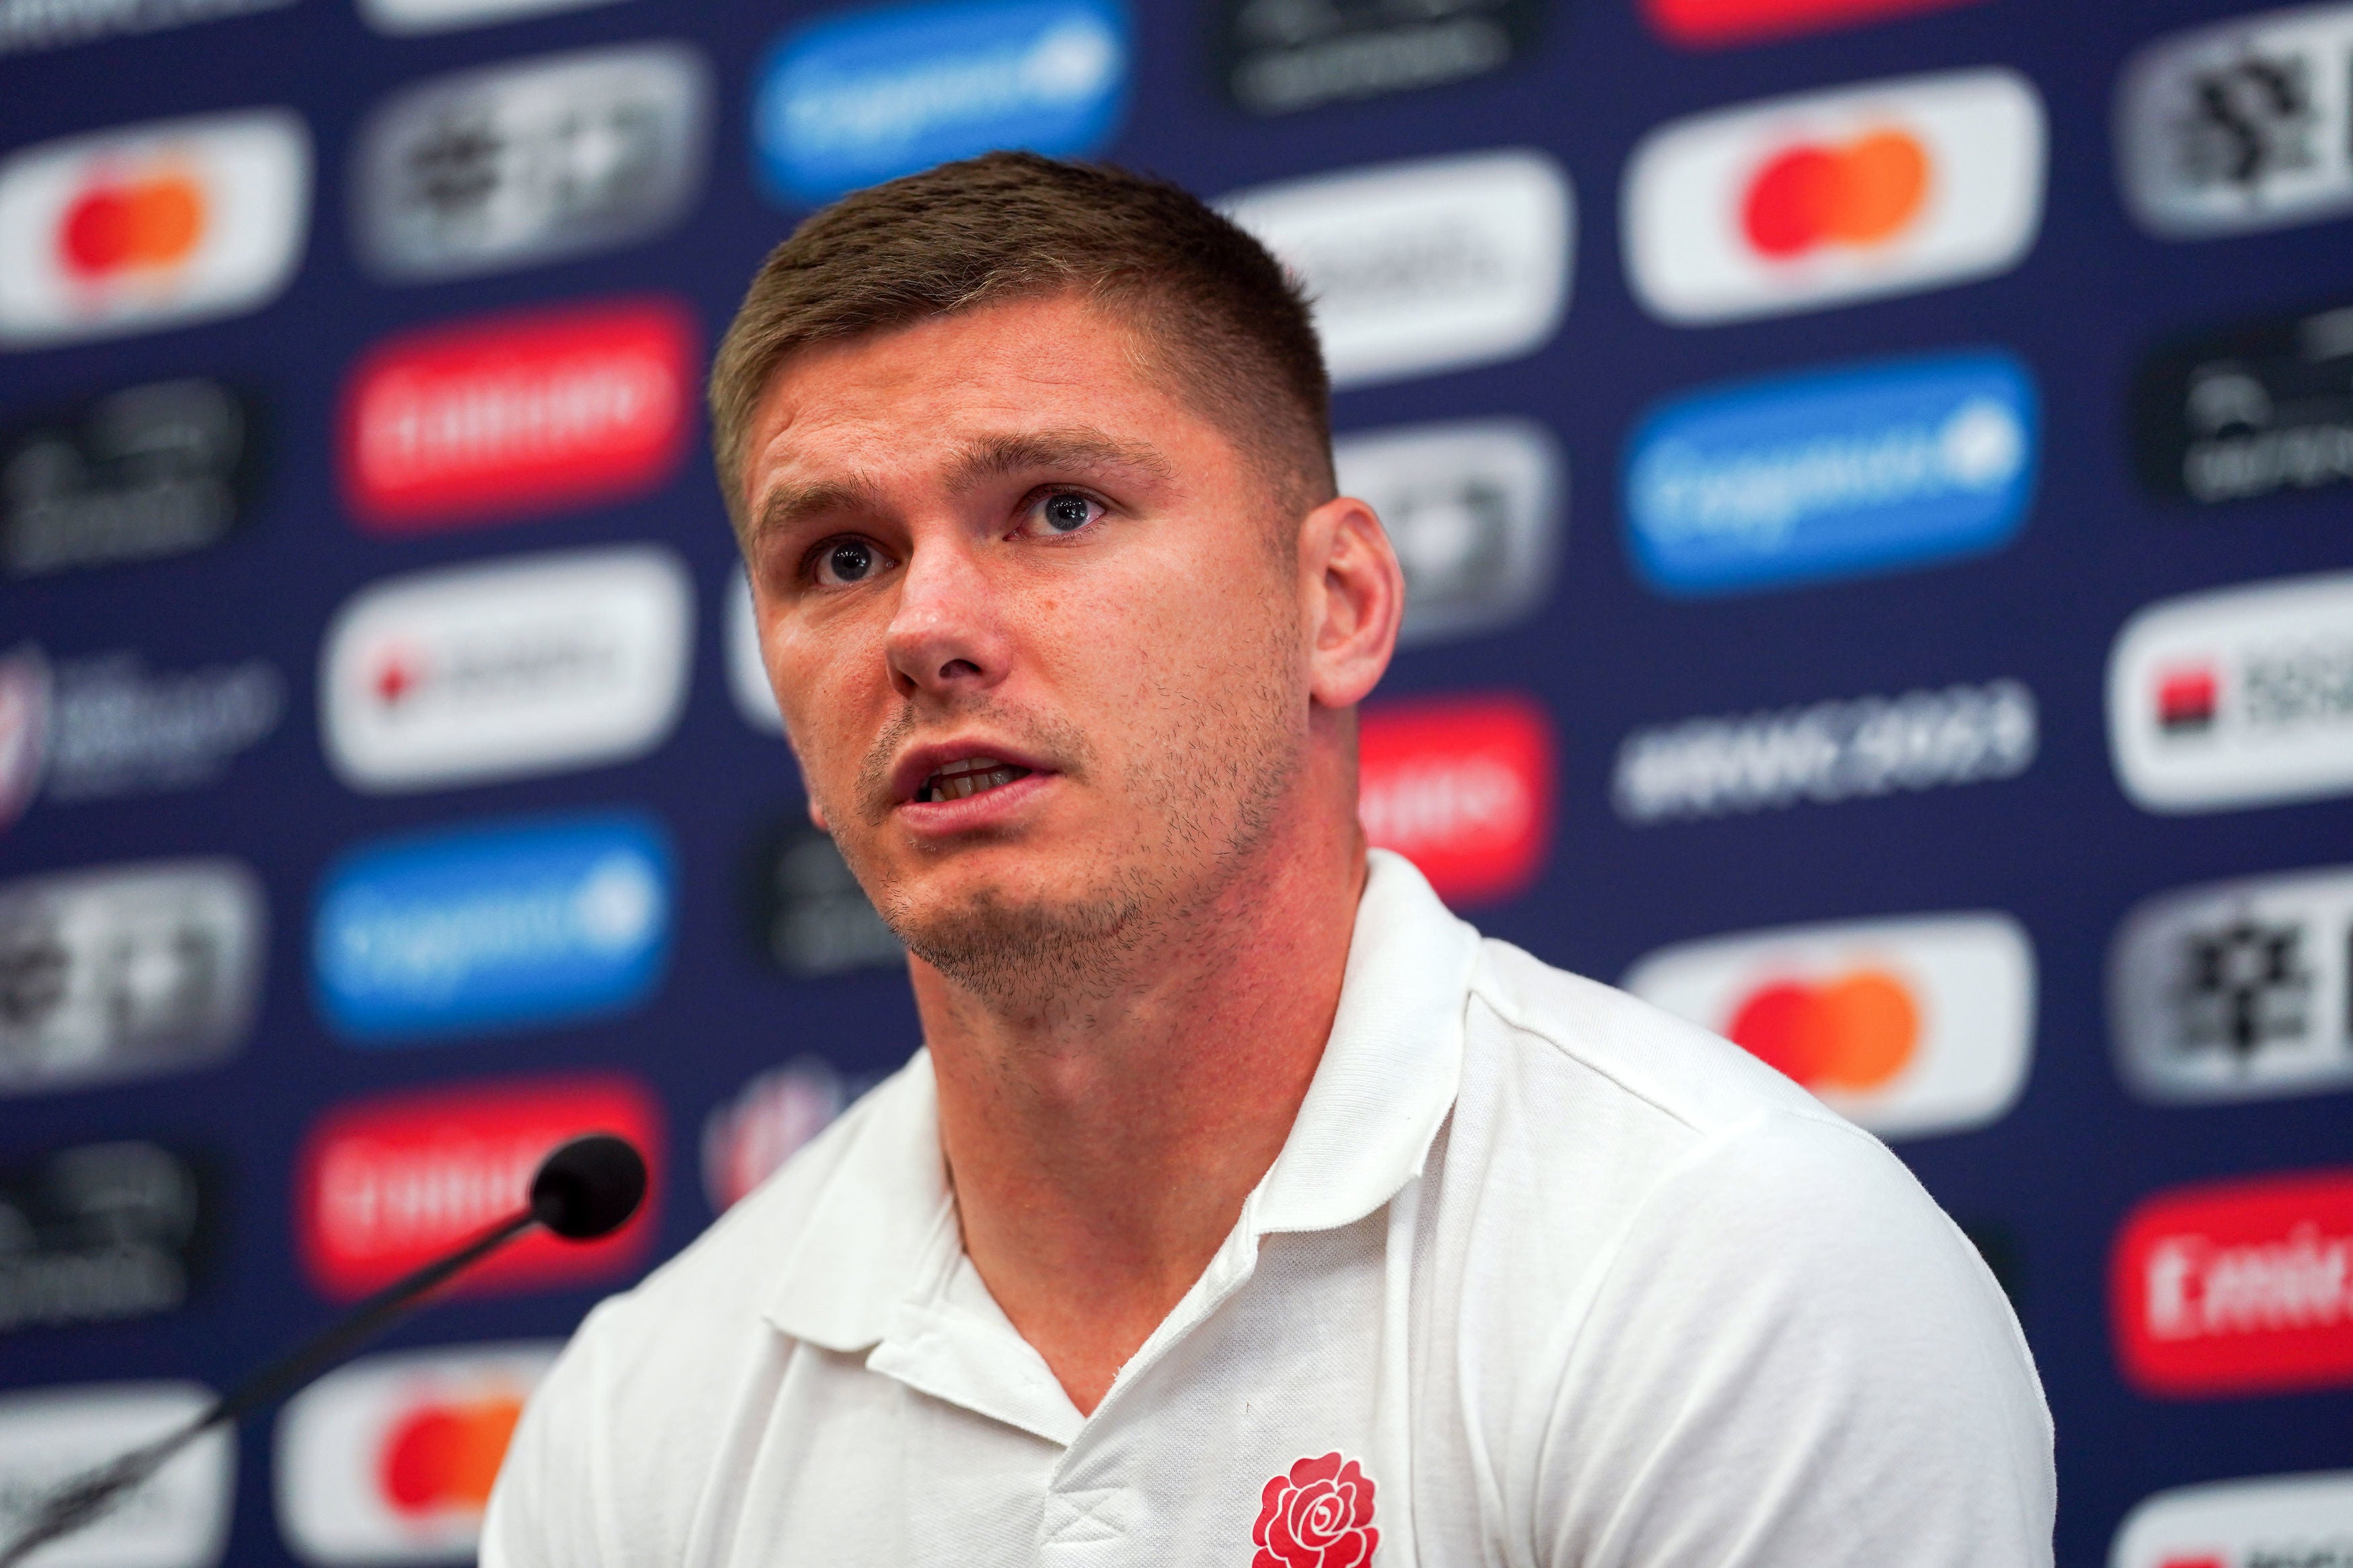 Owen Farrell says some critics forget they are ‘dealing with people, with human beings’